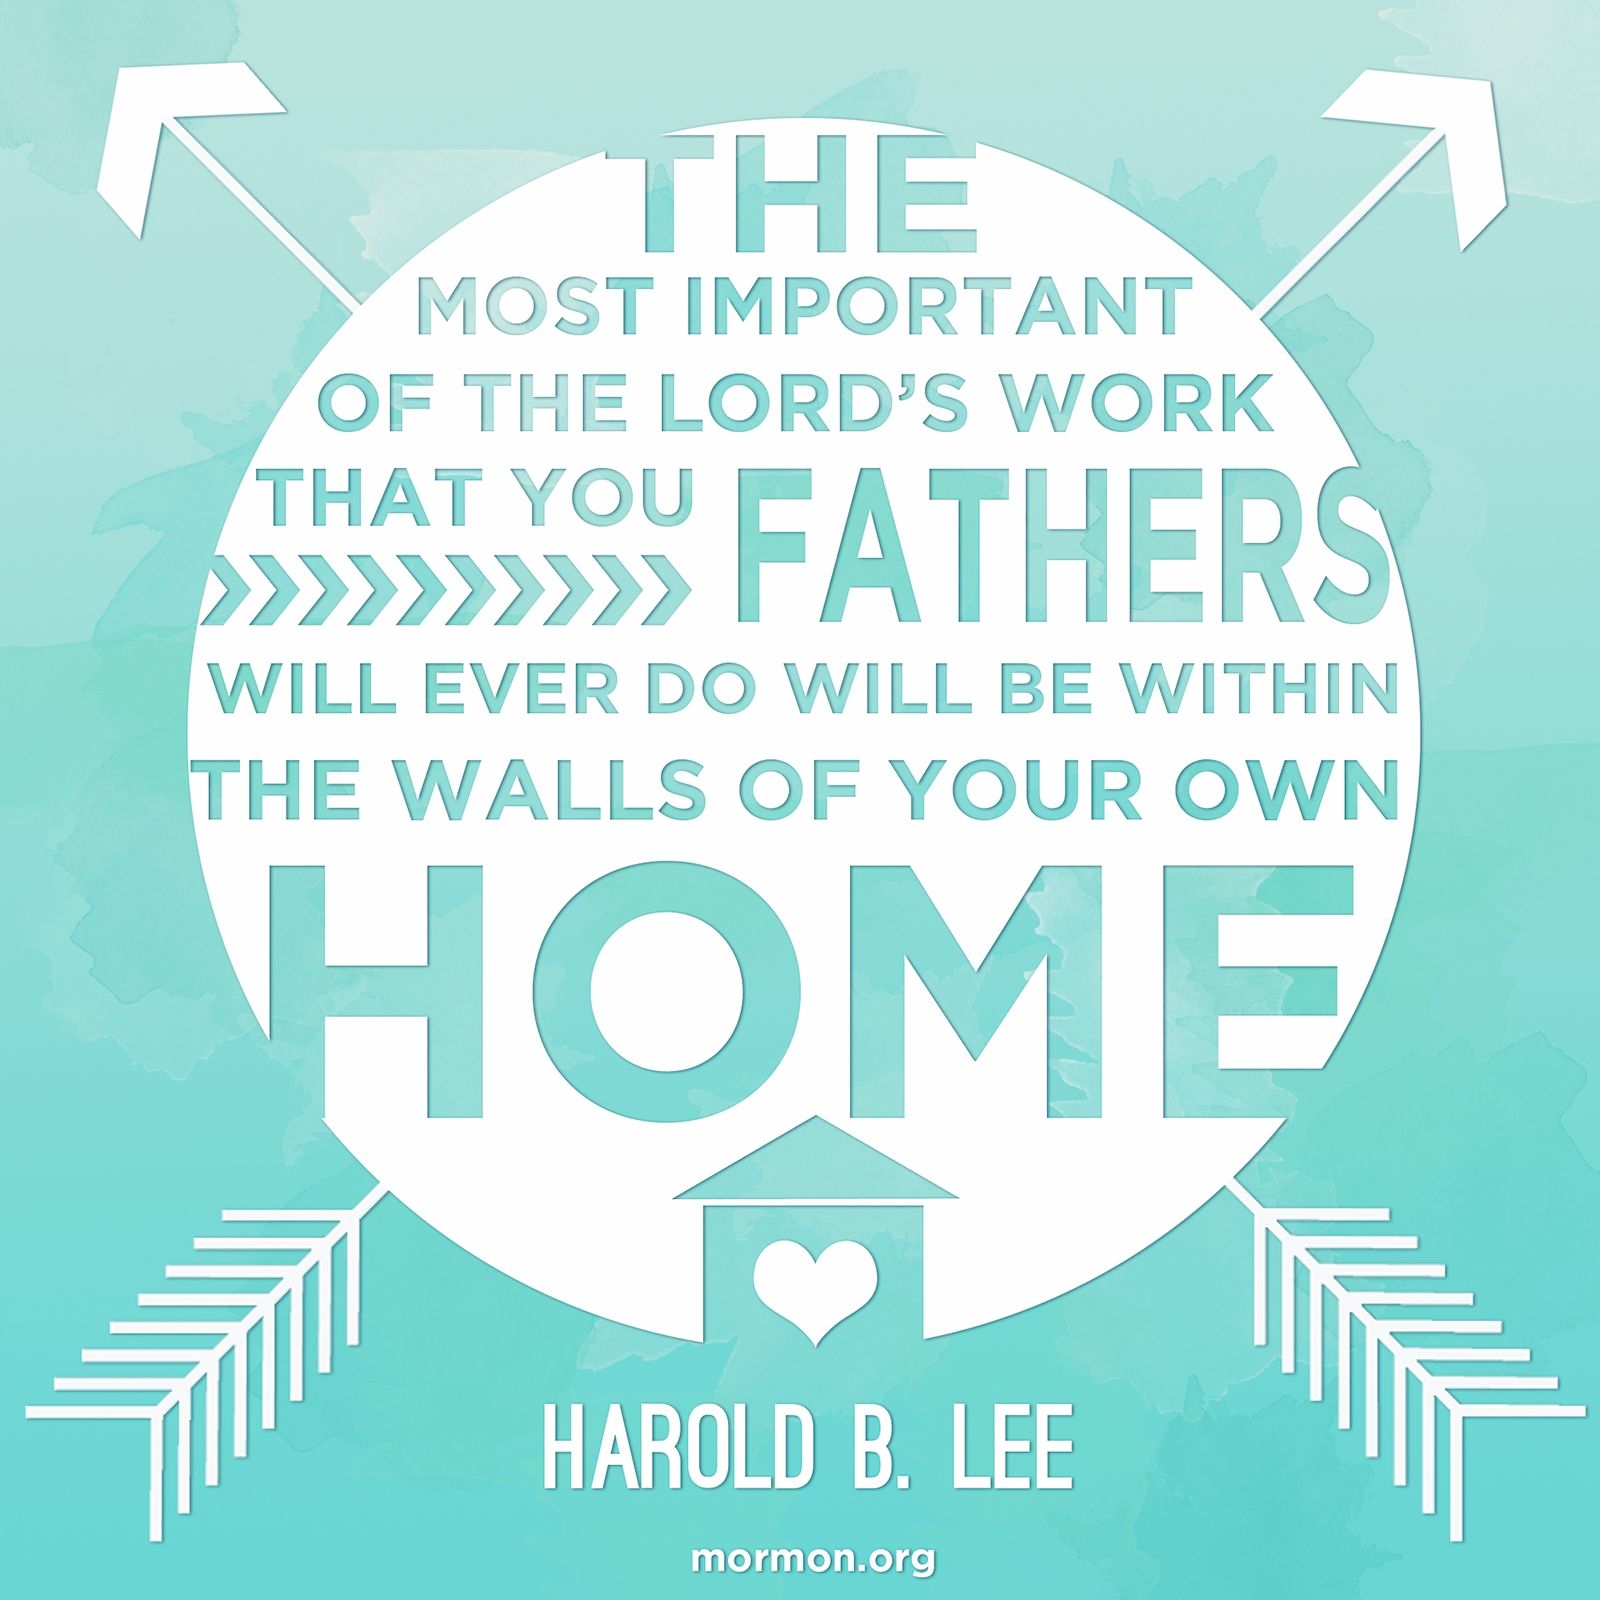 “The most important of the Lord’s work that you fathers will ever do will be within the walls of your own home.”—President Harold B. Lee, Teachings of Presidents of the Church: Harold B. Lee (2000), 134